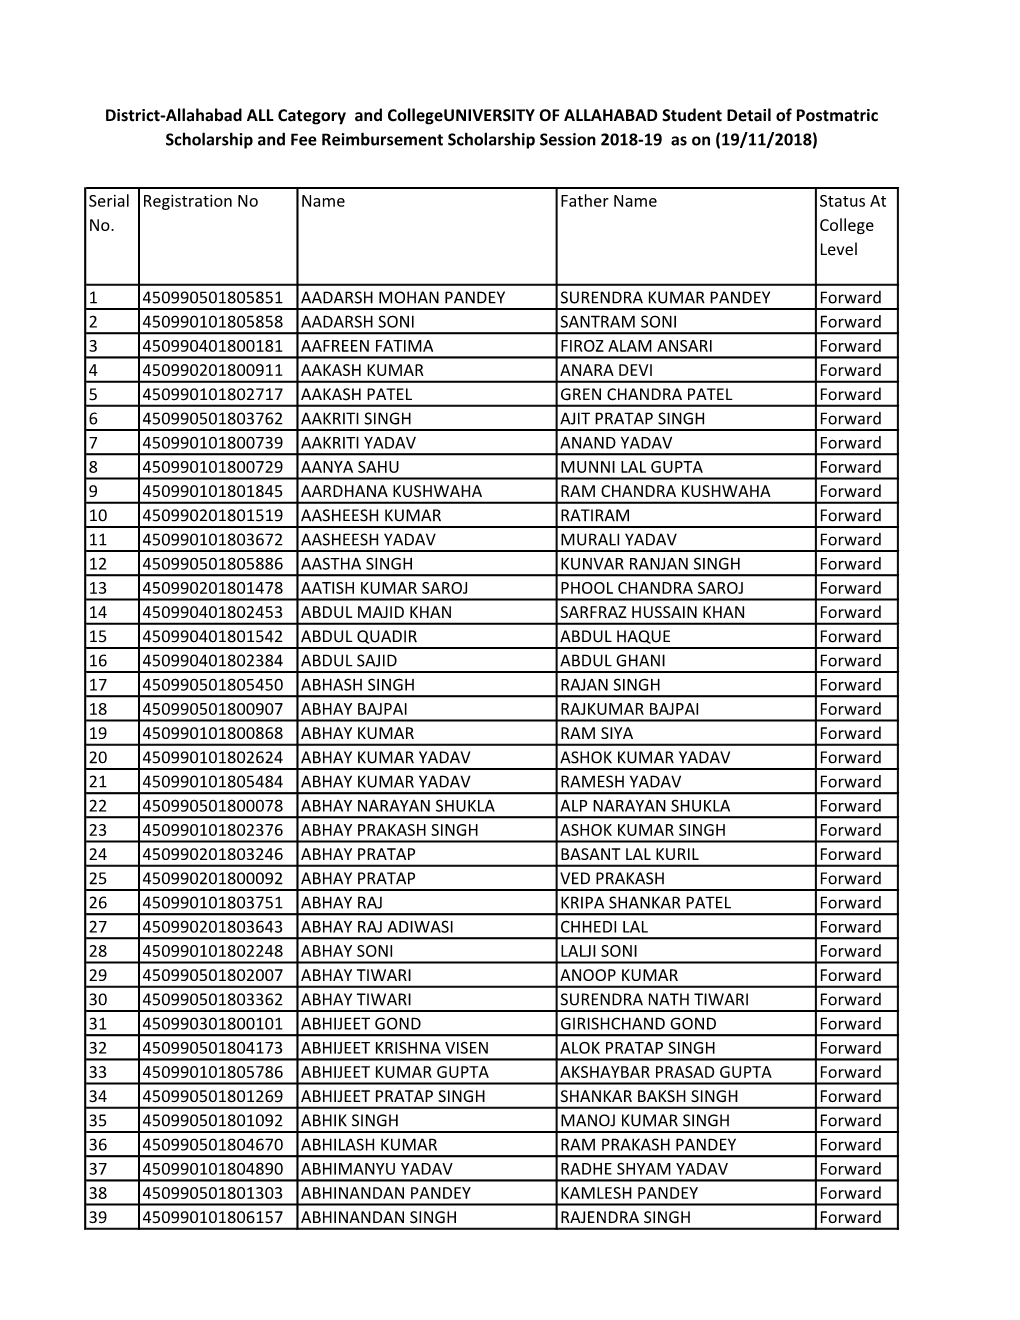 Serial No. Registration No Name Father Name Status at College